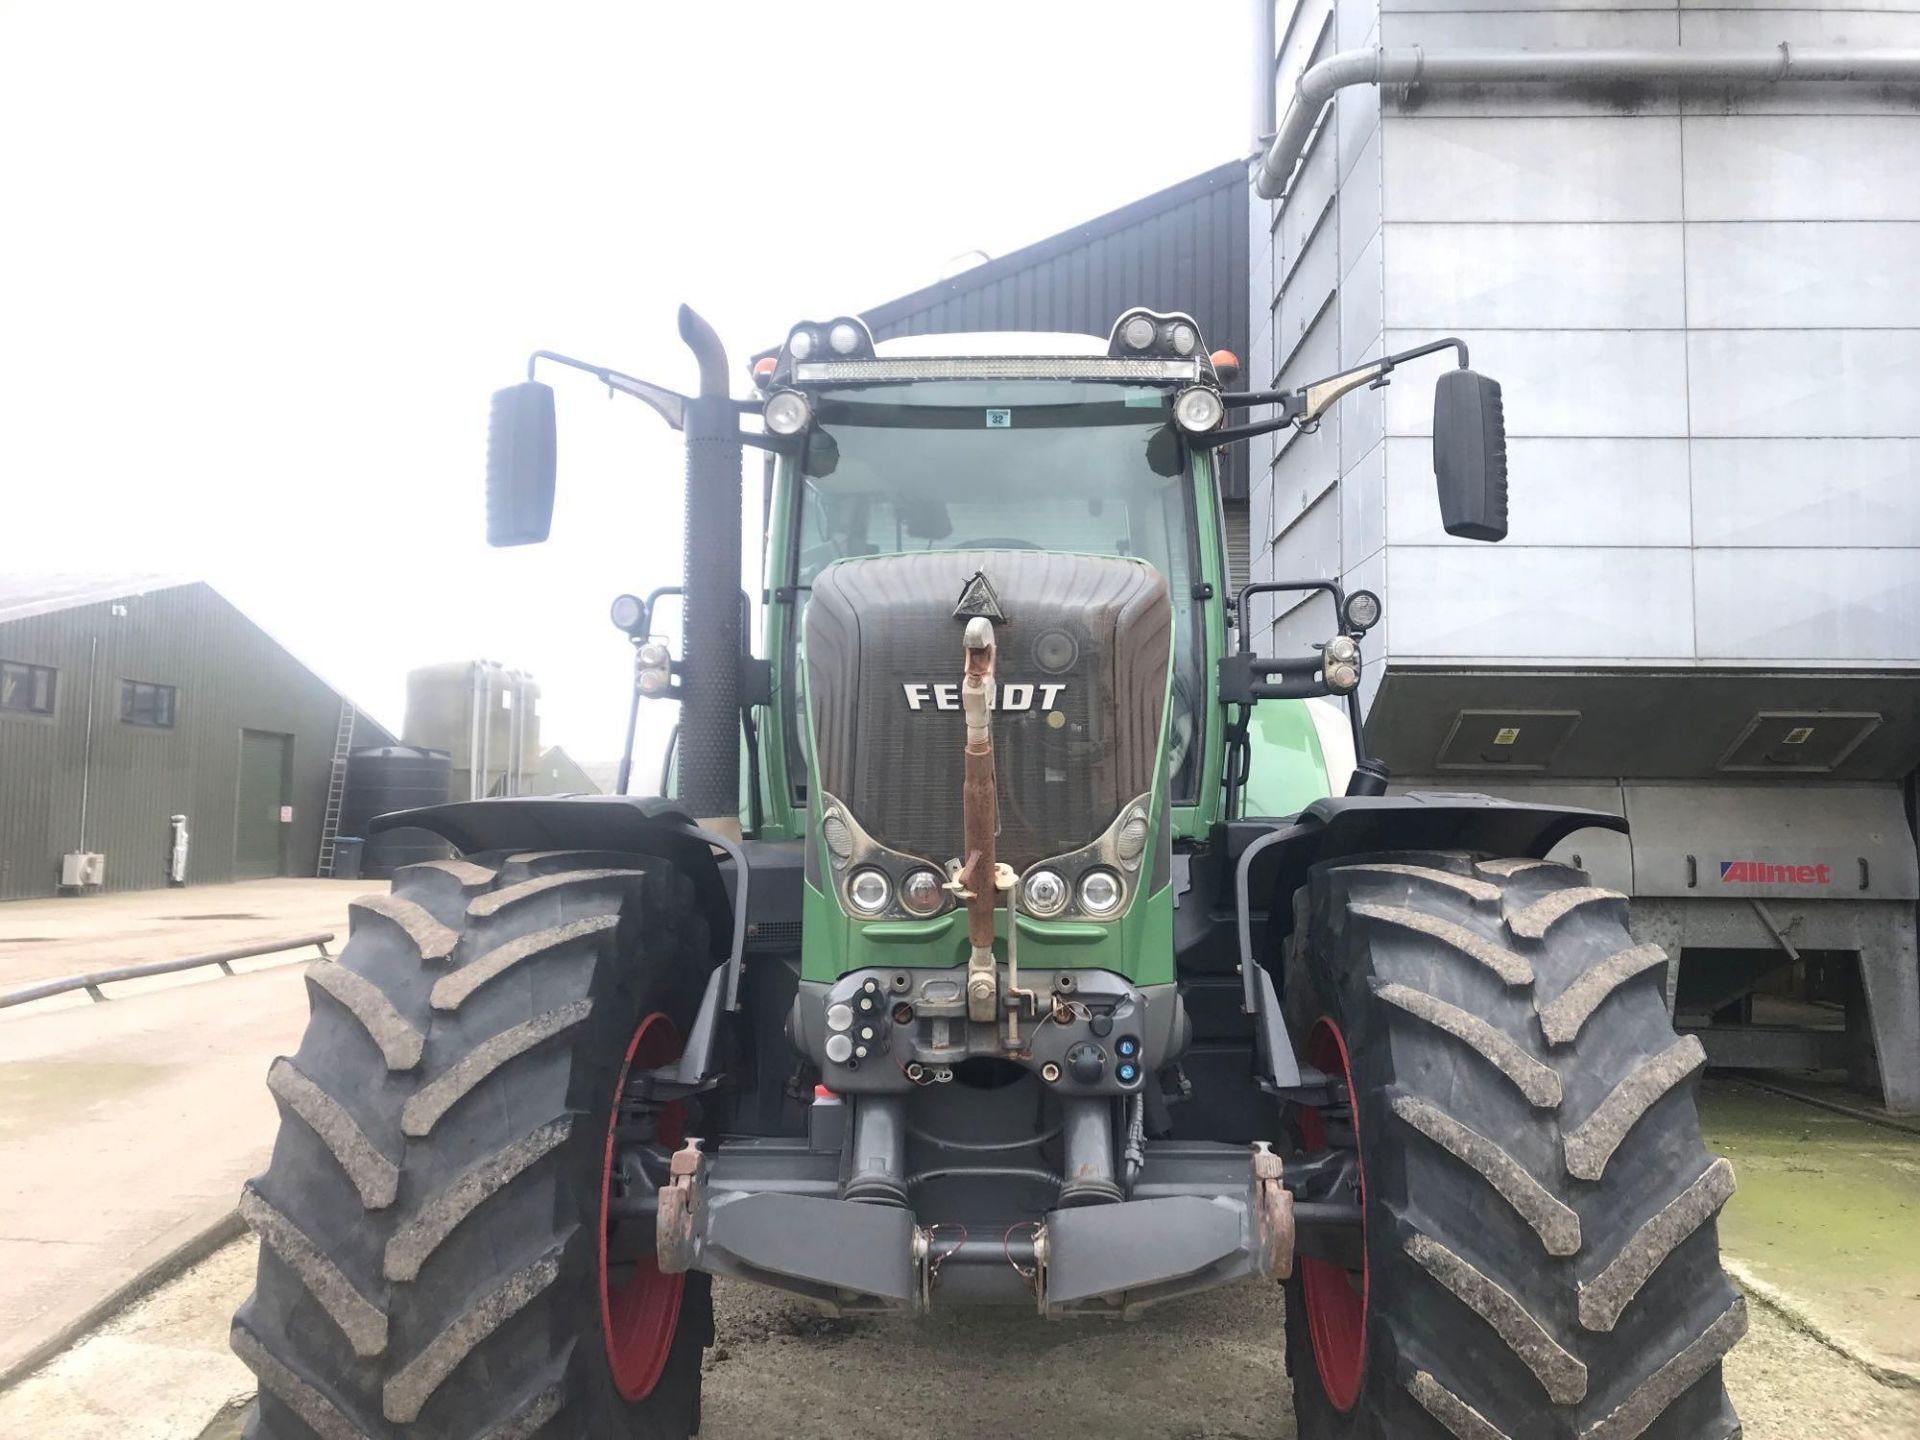 2013 Fendt 828 Vario tractor, 4wd, front linkage, front spool valves, 4No rear spool valves, Bill Be - Image 23 of 23